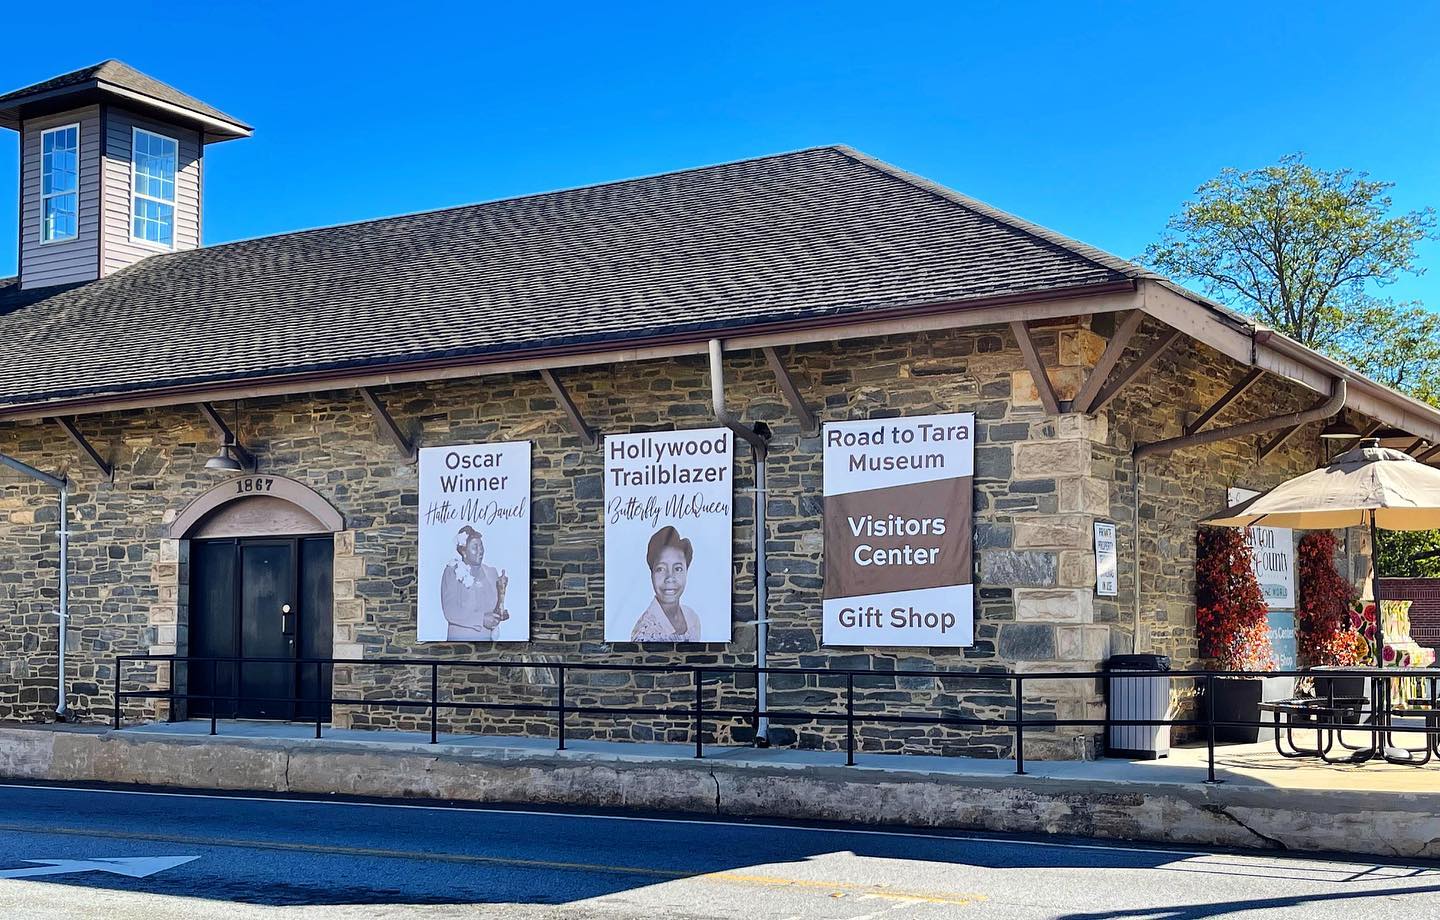 Check out our newly installed signage to welcome passersby at our Historic Train Depot, 104 N. Main St., Jonesboro, Georgia. Stop in to see our exhibits on legendary Hollywood actresses Hattie McDaniel and Butterfly McQueen. 🎞 #seeclaytoncountyga #claytoncountyga #claytoncounty